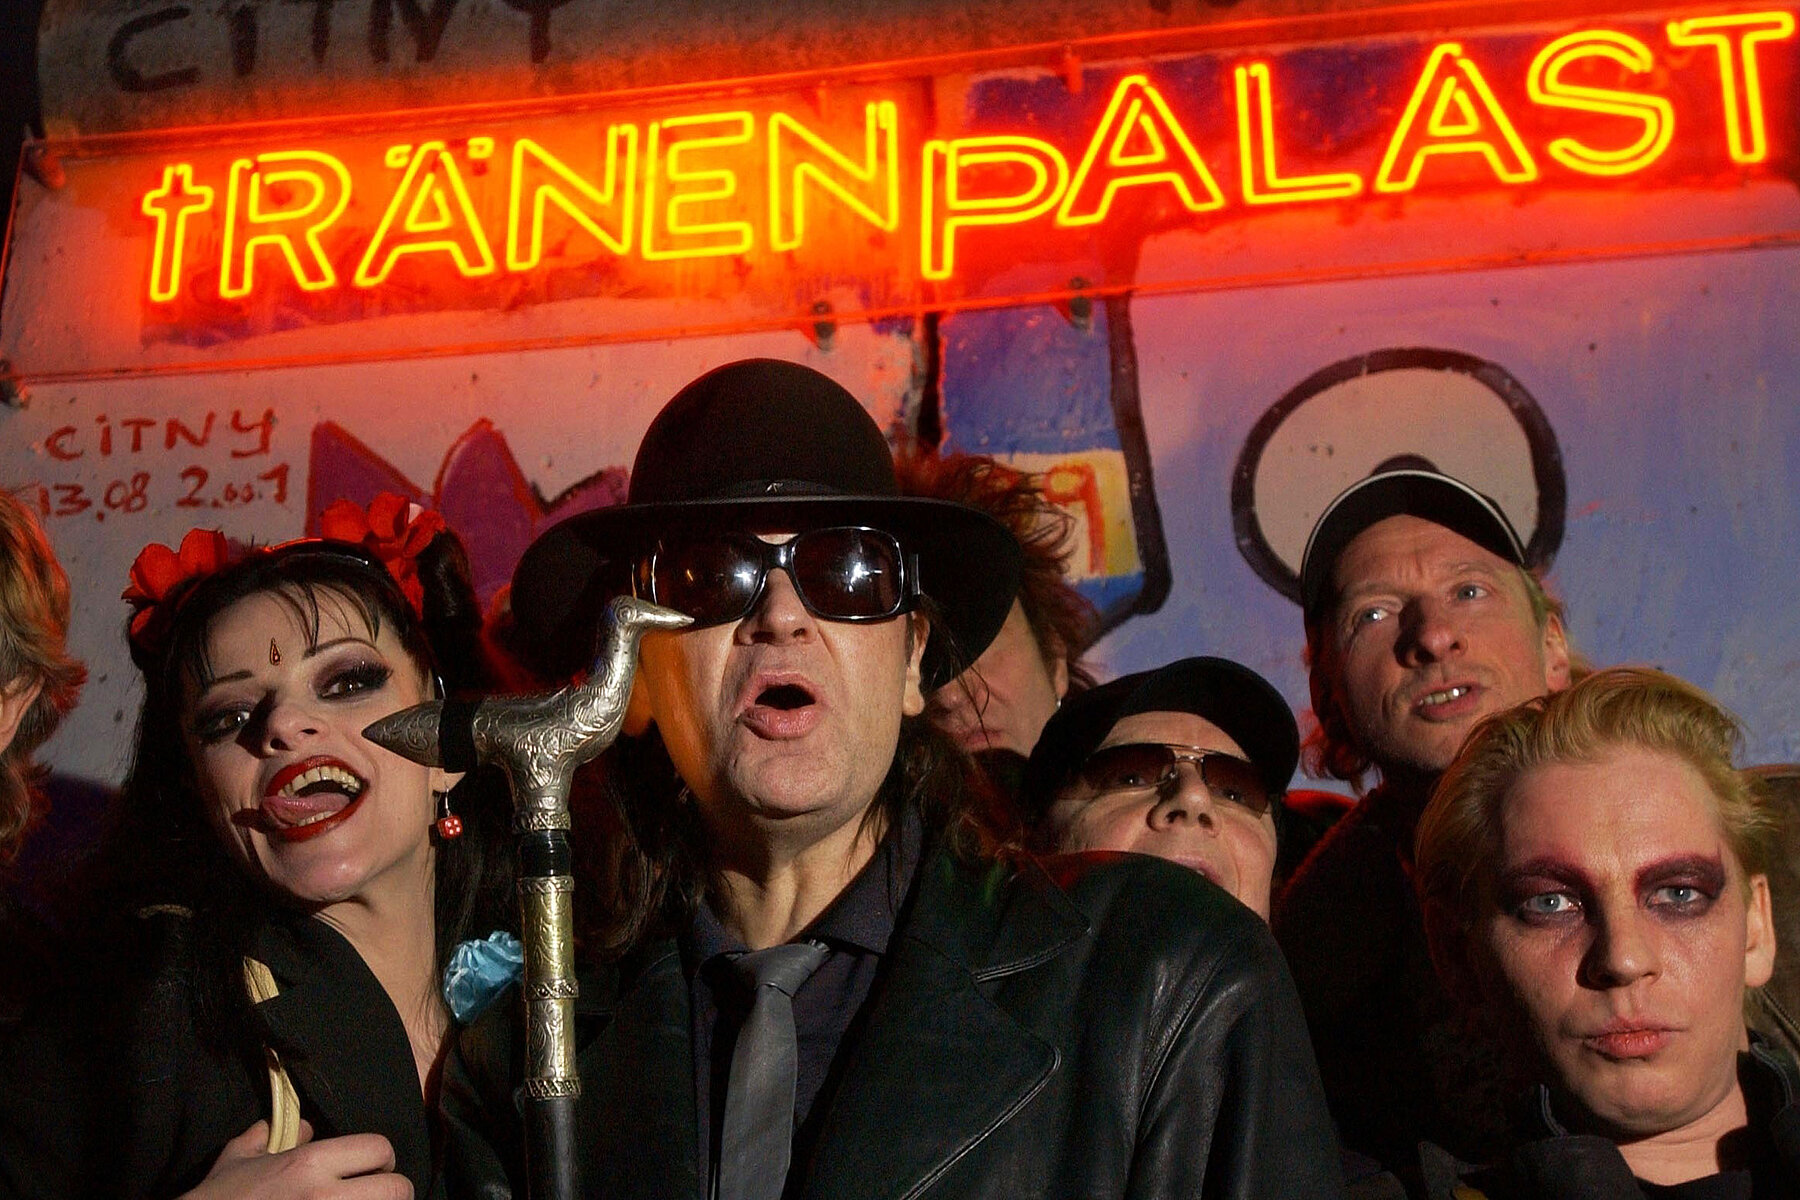 Nina Hagen, Udo Lindenberg, Ben Becker and other celebrities in front of the red neon sign tRÄNENpALAST on a piece of the Berlin Wall with graffiti. 